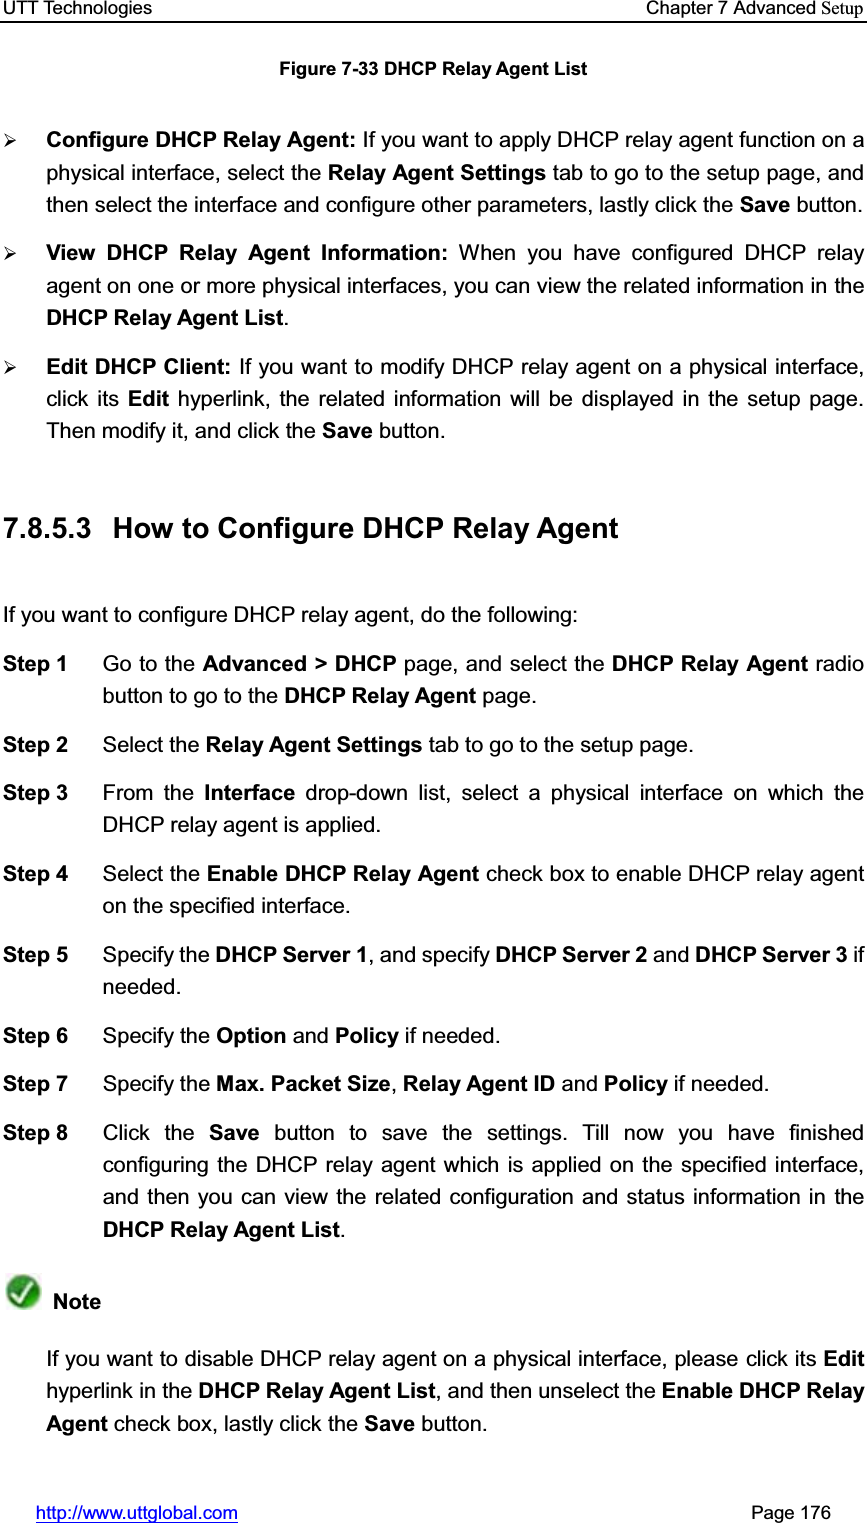 UTT Technologies    Chapter 7 Advanced Setuphttp://www.uttglobal.com                                                       Page 176 Figure 7-33 DHCP Relay Agent List ¾Configure DHCP Relay Agent: If you want to apply DHCP relay agent function on a physical interface, select the Relay Agent Settings tab to go to the setup page, and then select the interface and configure other parameters, lastly click the Save button. ¾View DHCP Relay Agent Information: When you have configured DHCP relay agent on one or more physical interfaces, you can view the related information in theDHCP Relay Agent List.¾Edit DHCP Client: If you want to modify DHCP relay agent on a physical interface, click its Edit hyperlink, the related information will be displayed in the setup page. Then modify it, and click the Save button. 7.8.5.3  How to Configure DHCP Relay Agent   If you want to configure DHCP relay agent, do the following:   Step 1  Go to the Advanced &gt; DHCP page, and select the DHCP Relay Agent radio button to go to the DHCP Relay Agent page. Step 2  Select the Relay Agent Settings tab to go to the setup page. Step 3  From the Interface drop-down list, select a physical interface on which the DHCP relay agent is applied. Step 4  Select the Enable DHCP Relay Agent check box to enable DHCP relay agent on the specified interface. Step 5  Specify the DHCP Server 1, and specify DHCP Server 2 and DHCP Server 3 ifneeded. Step 6  Specify the Option and Policy if needed. Step 7  Specify the Max. Packet Size,Relay Agent ID and Policy if needed. Step 8  Click the Save button to save the settings. Till now you have finished configuring the DHCP relay agent which is applied on the specified interface,and then you can view the related configuration and status information in theDHCP Relay Agent List.NoteIf you want to disable DHCP relay agent on a physical interface, please click its Edithyperlink in the DHCP Relay Agent List, and then unselect the Enable DHCP Relay Agent check box, lastly click the Save button. 